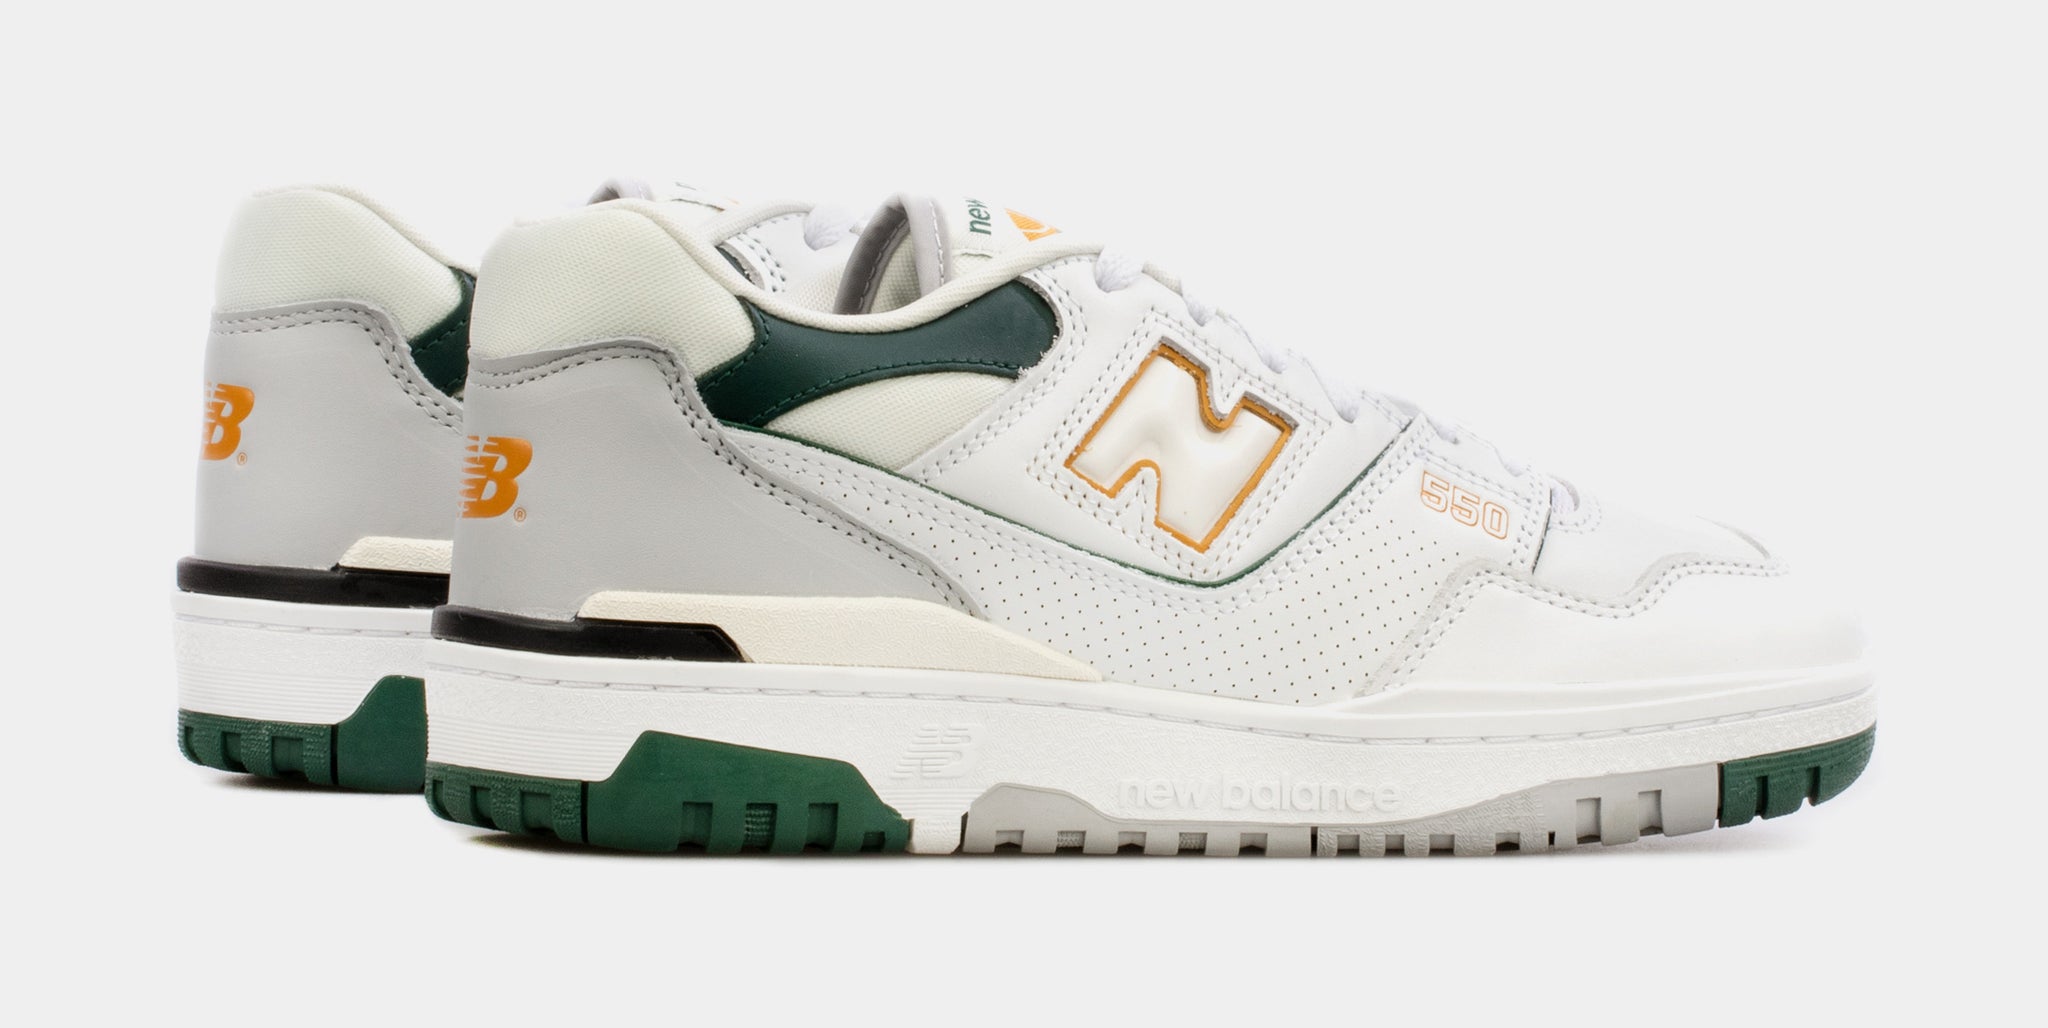 New Balance 550 Nightwatch Green Mens Lifestyle Shoes White